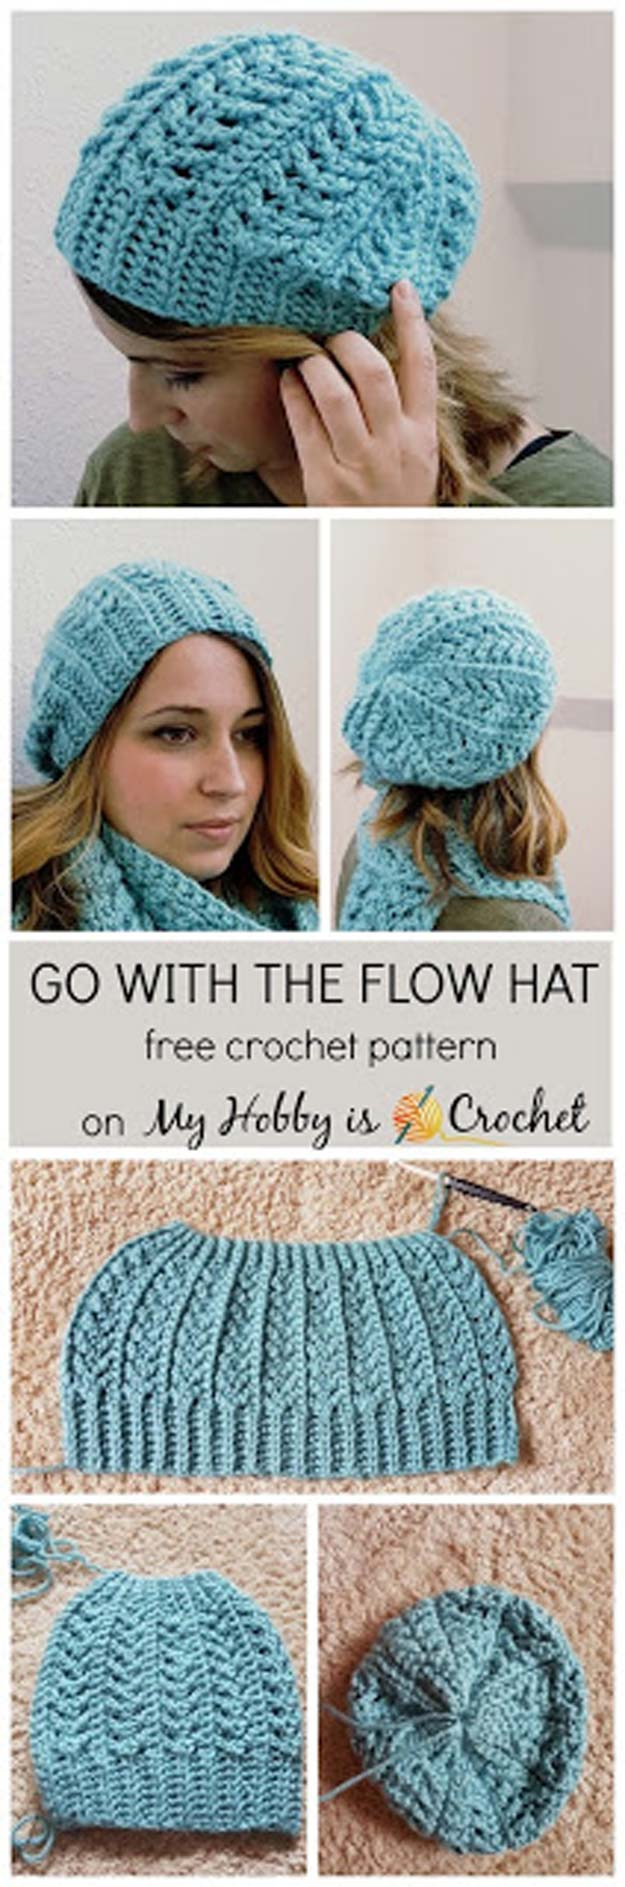 Cute Crochet Patterns 45 Fun And Easy Crochet Projects